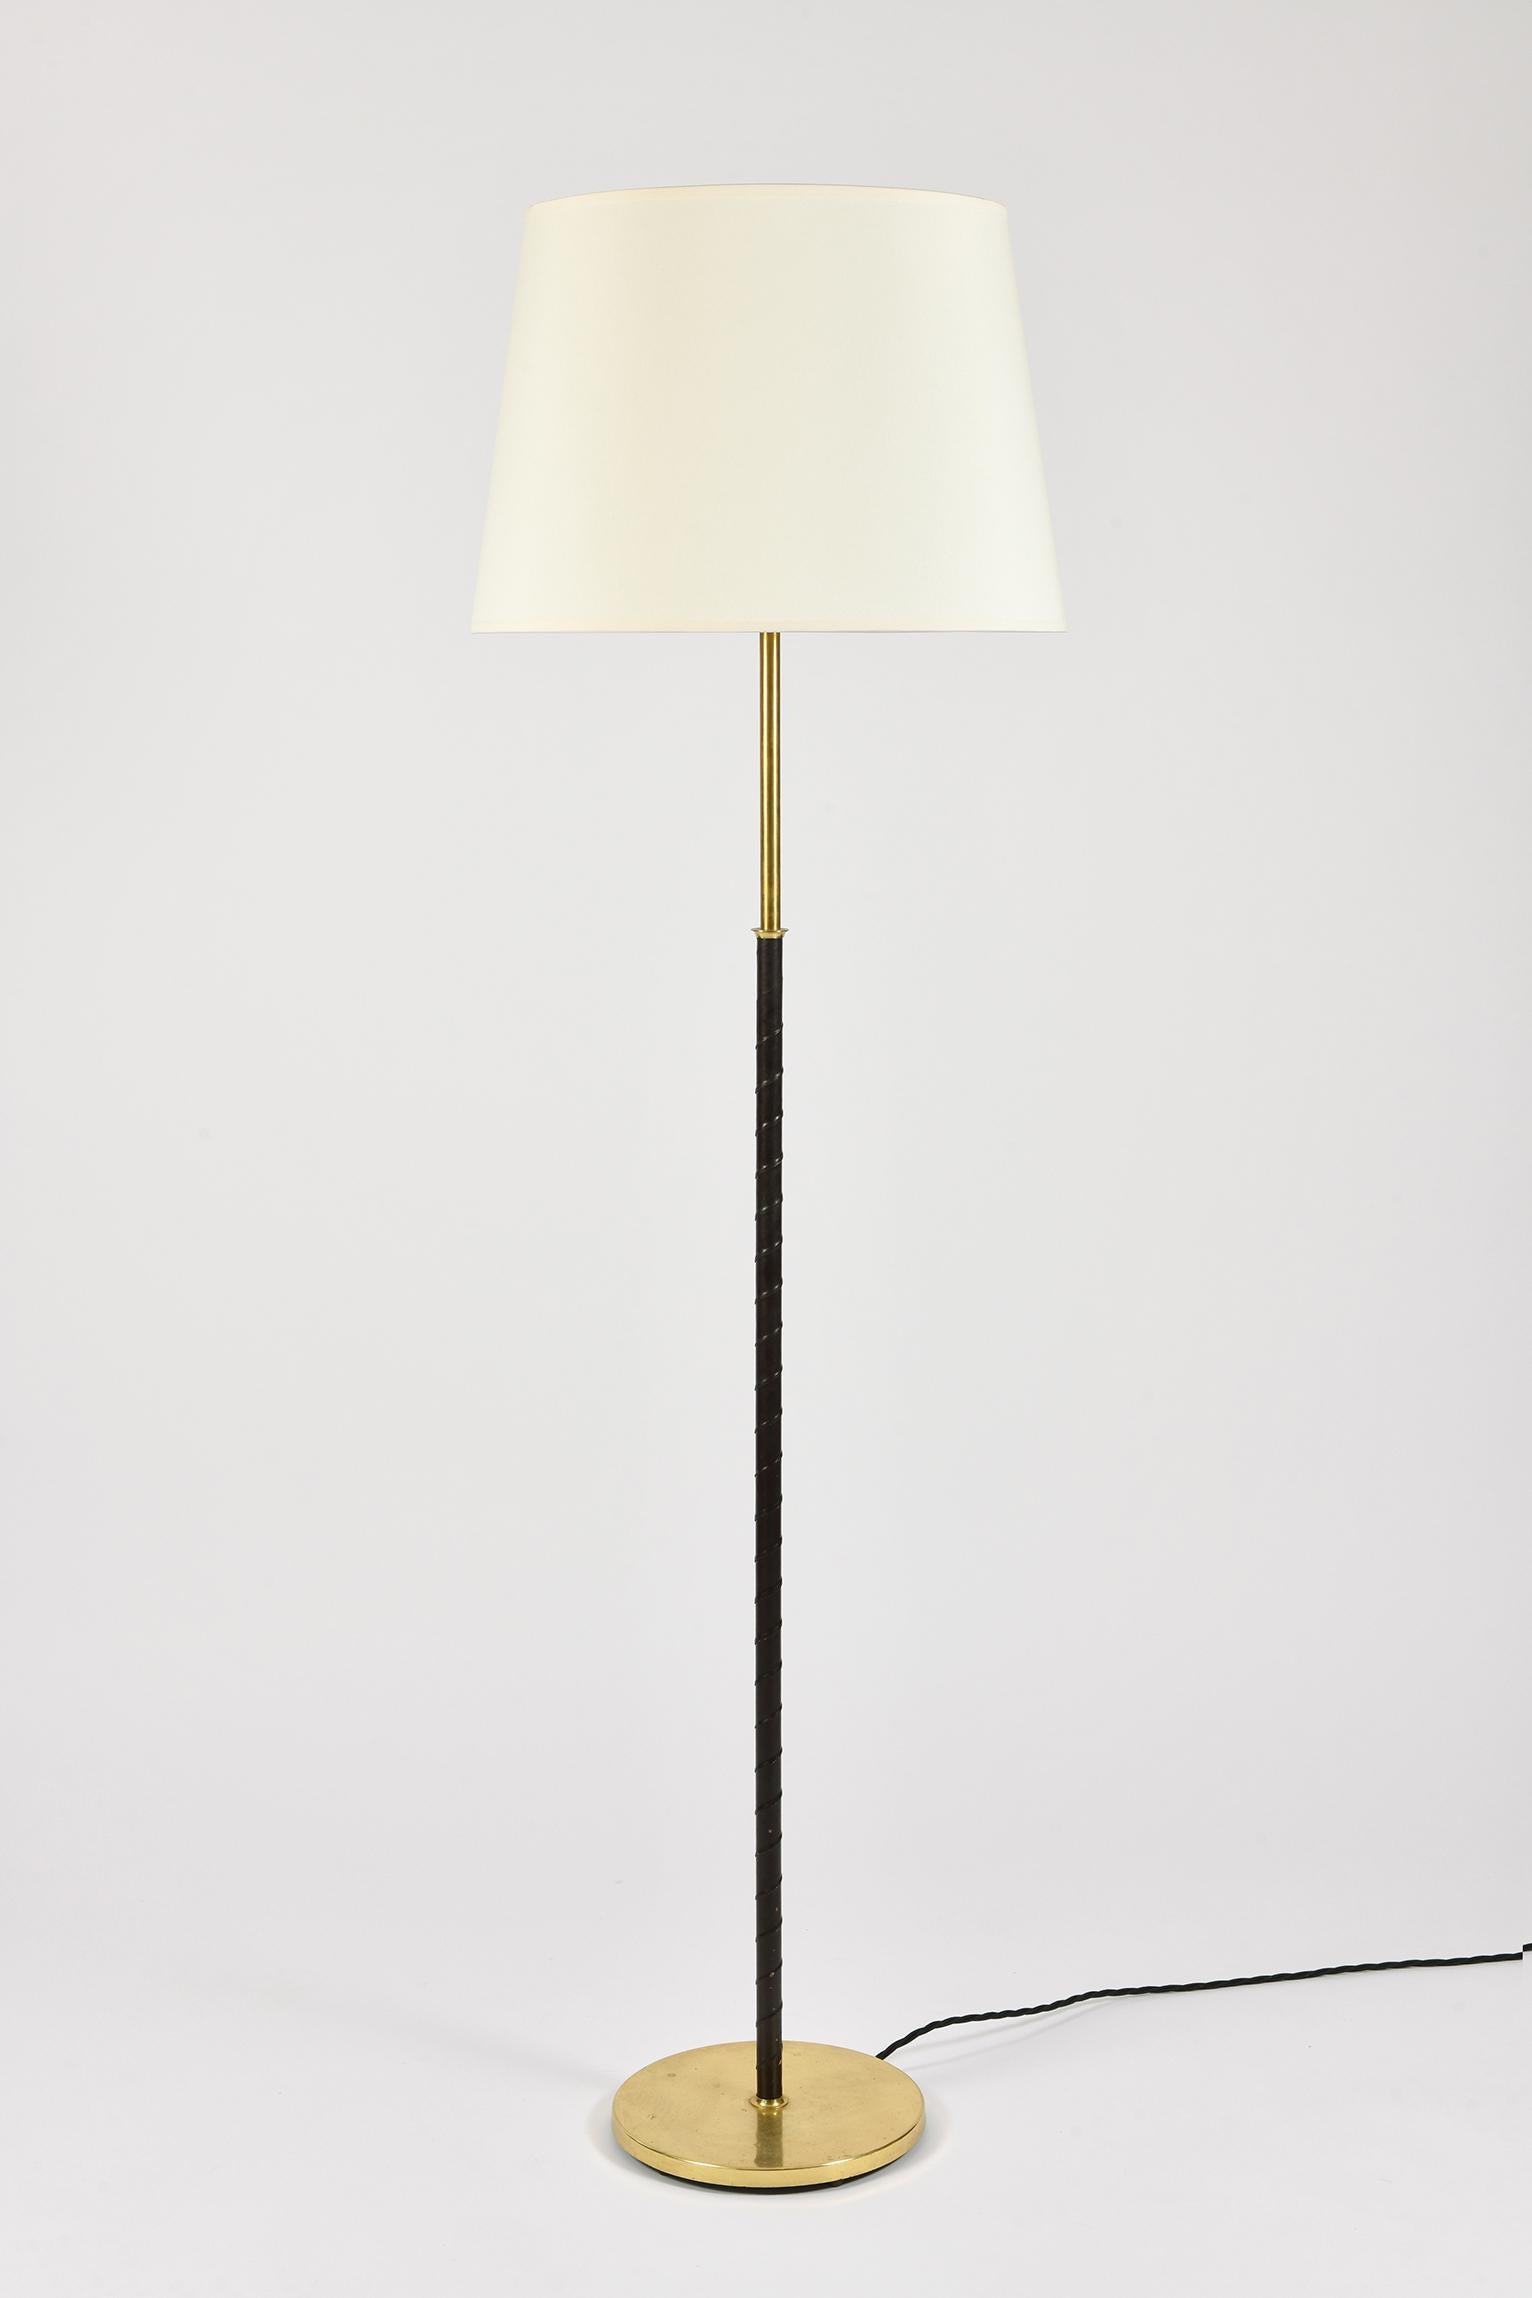 A brass and black leather floor lamp, with a bespoke ivory tapered shade
Sweden, circa 1970
The shade is included in the measurements.